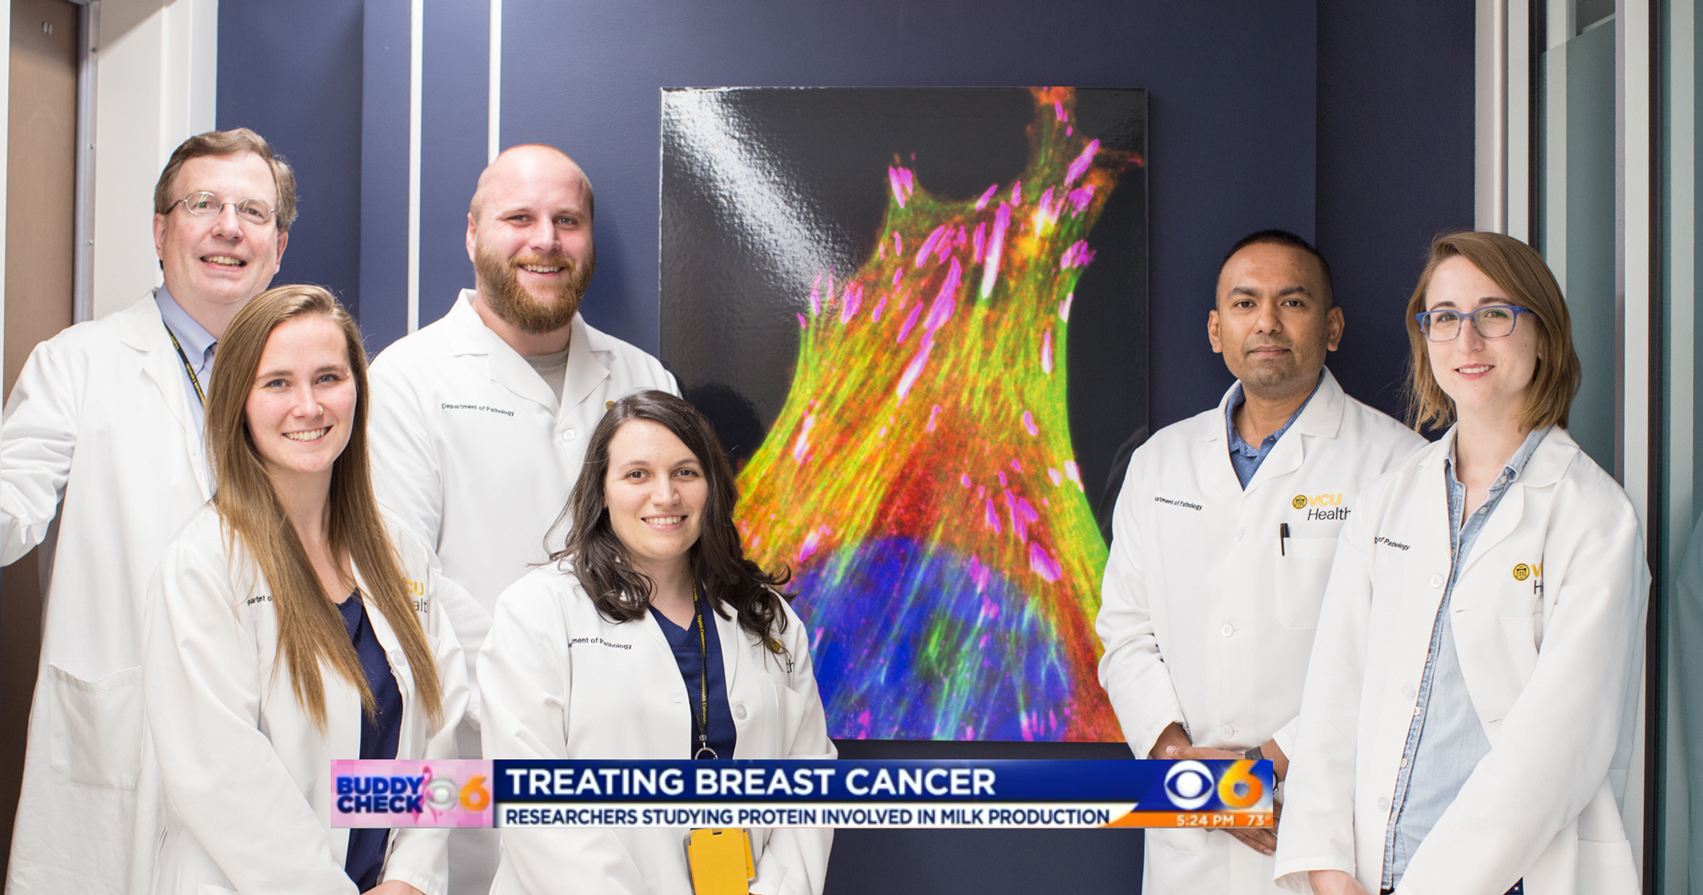 Dr. Clevenger, Department of Pathology Chair, featured on CBS 6, regarding his study of proteins involved in milk production to treat breast cancer.